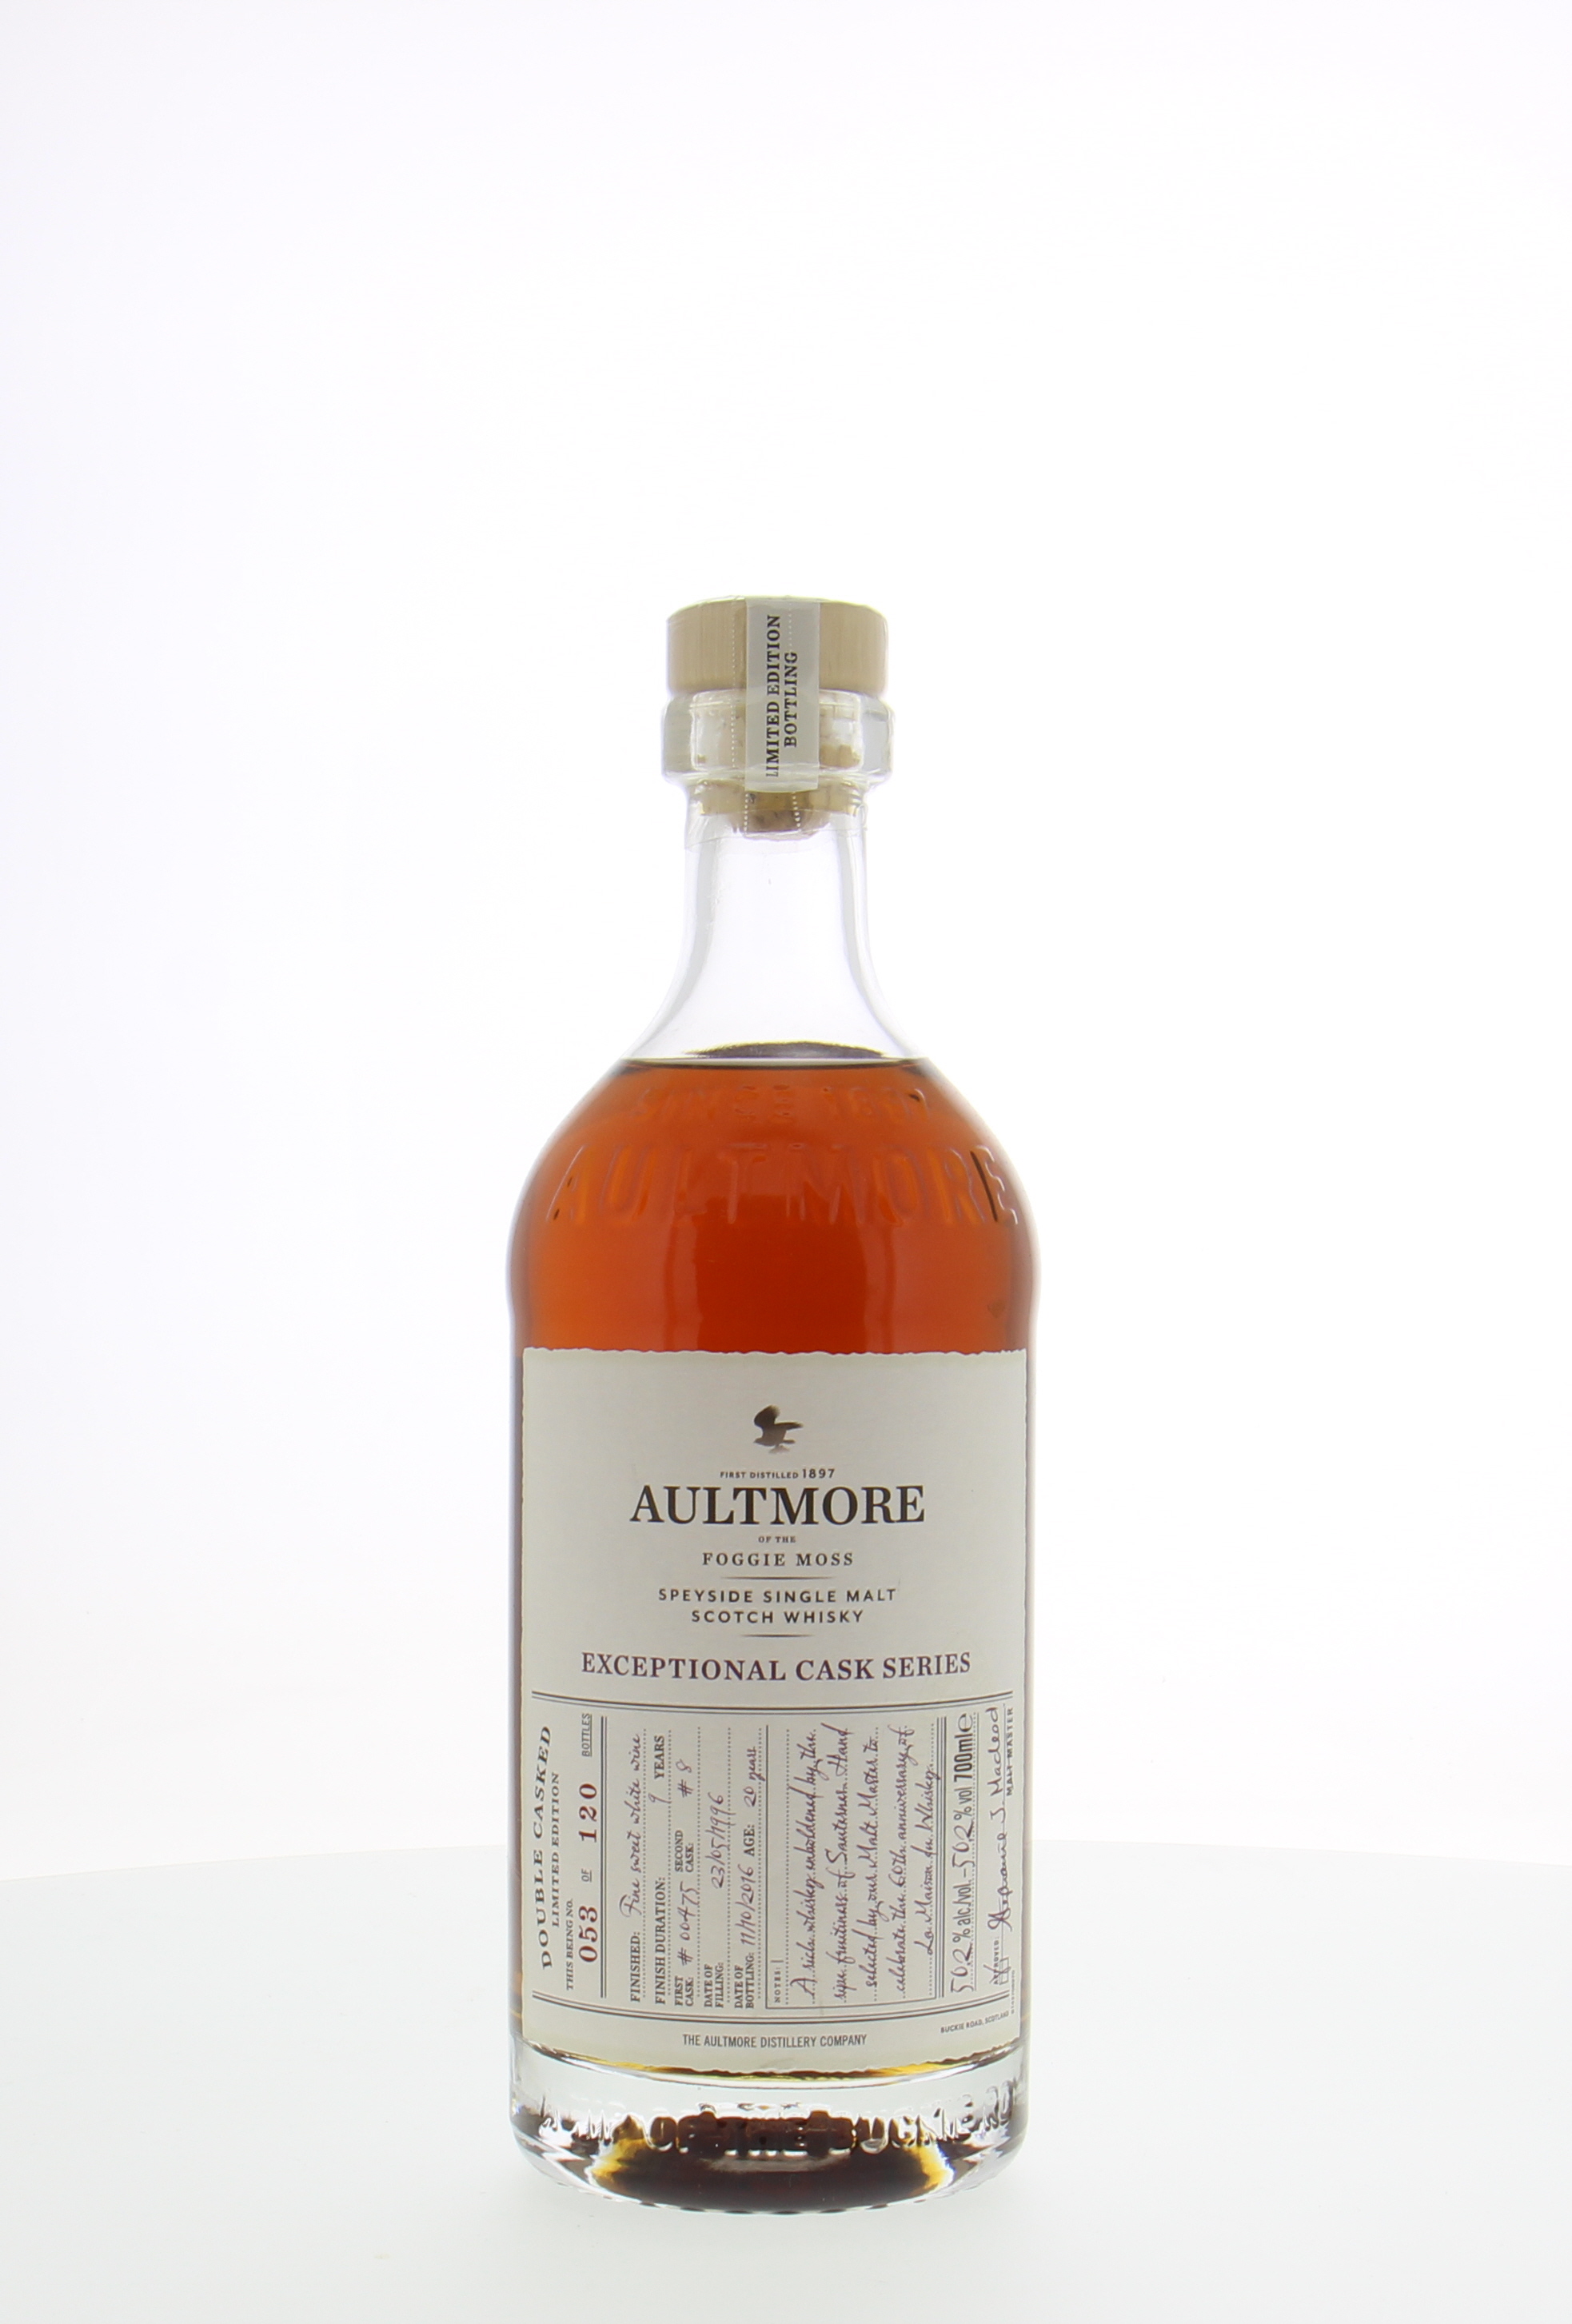 Aultmore - 20 Years Old Exceptional Cask Series Cask 00475+8 50.2% 1996 10046